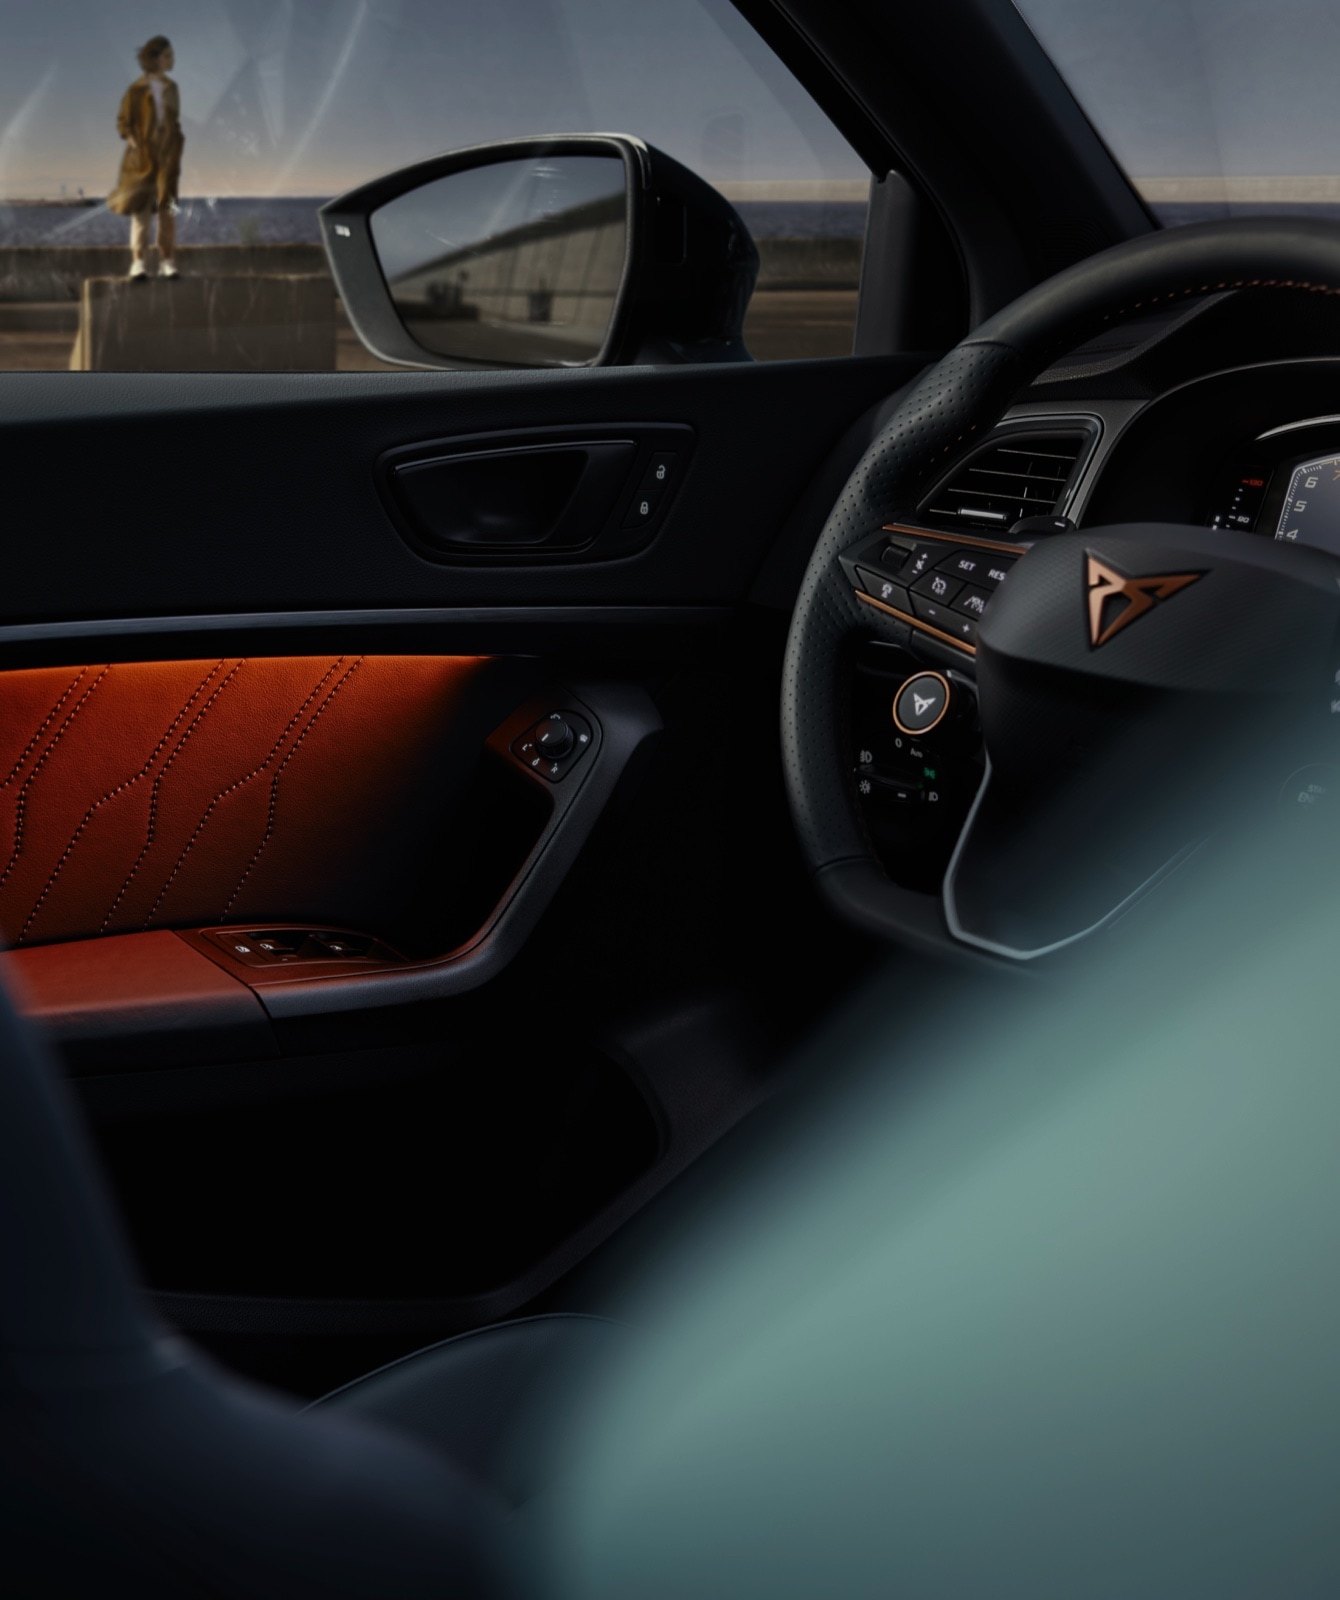 CUPRA interior car view of the steering wheel and rear mirror